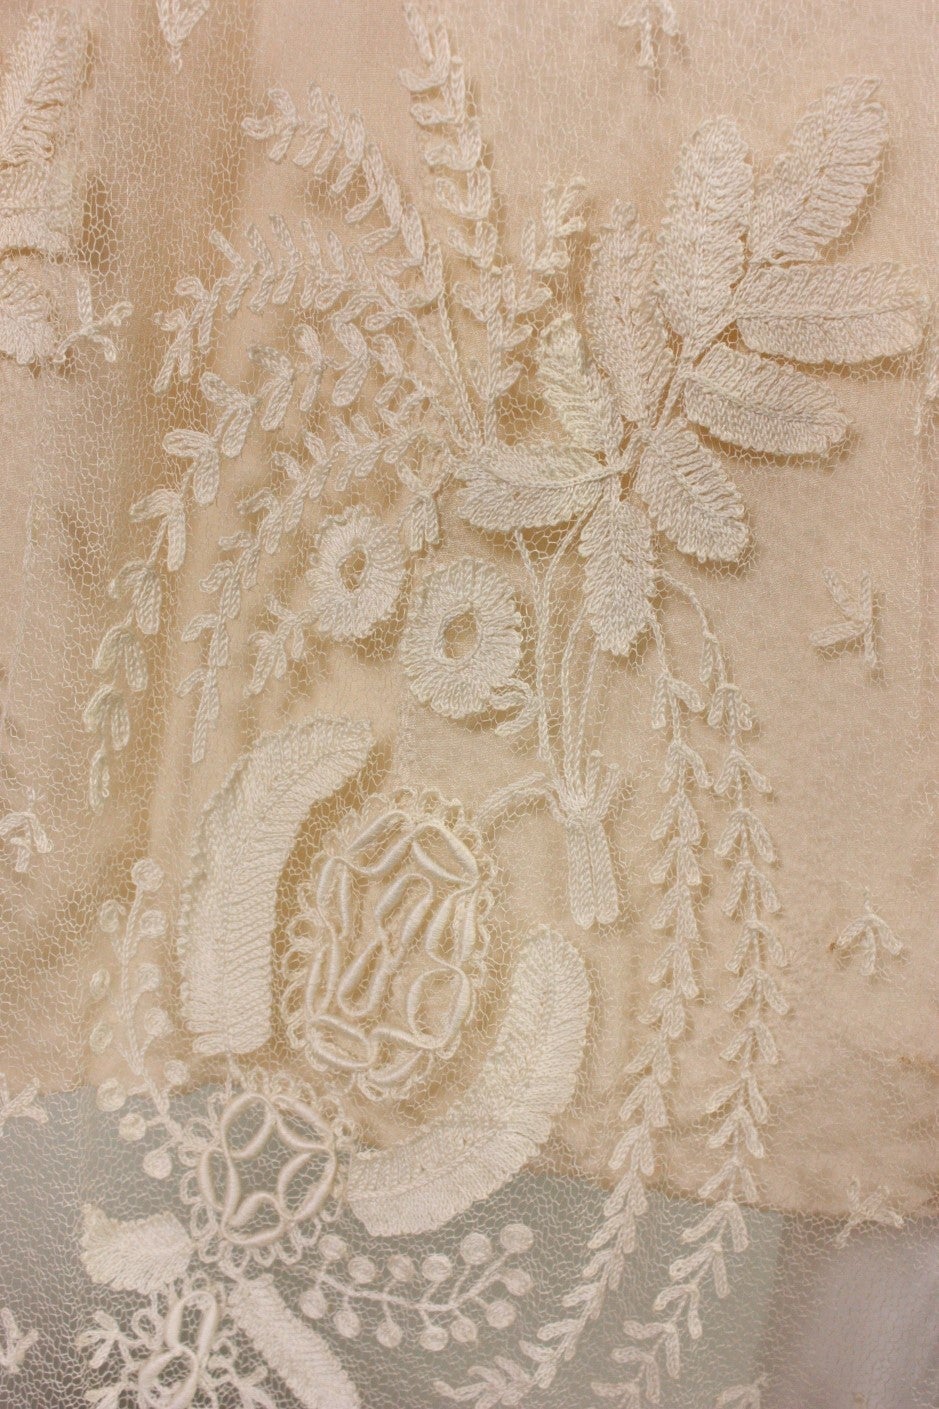 Cream Net Dress with Embroidery, 1910s For Sale 3